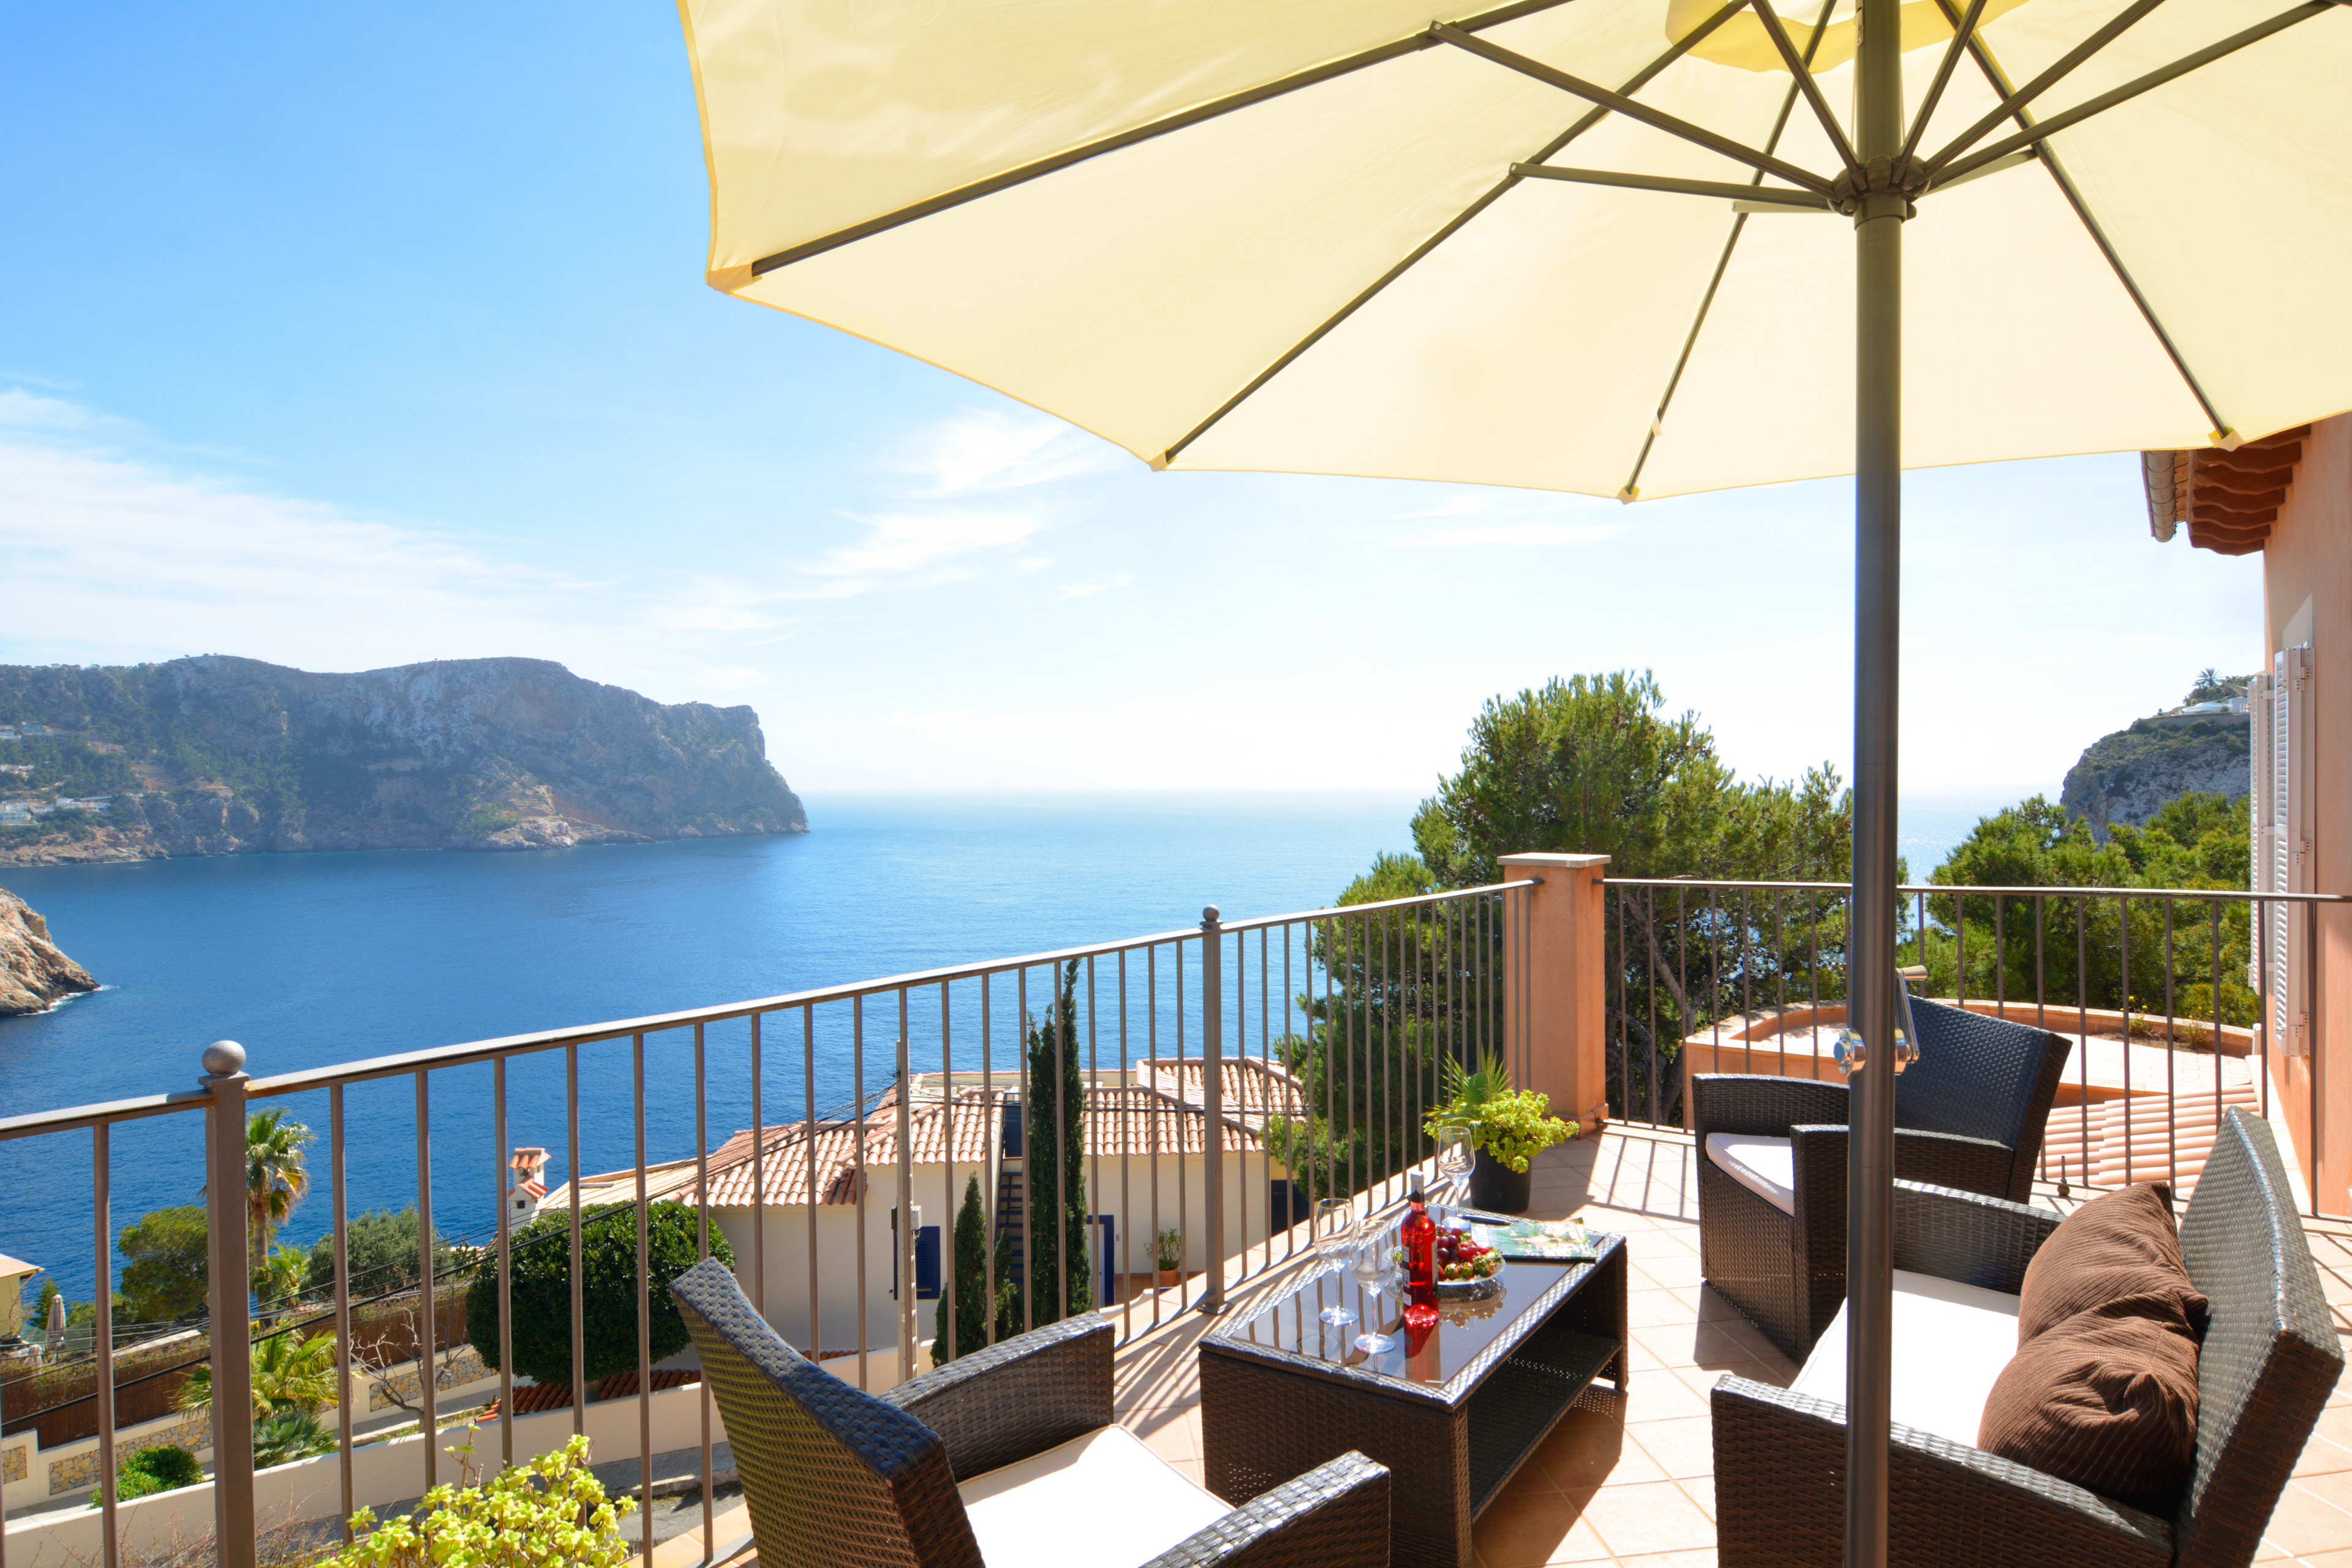 Villa with incredible sea views and pool sleeps 7 Ferienhaus in Europa